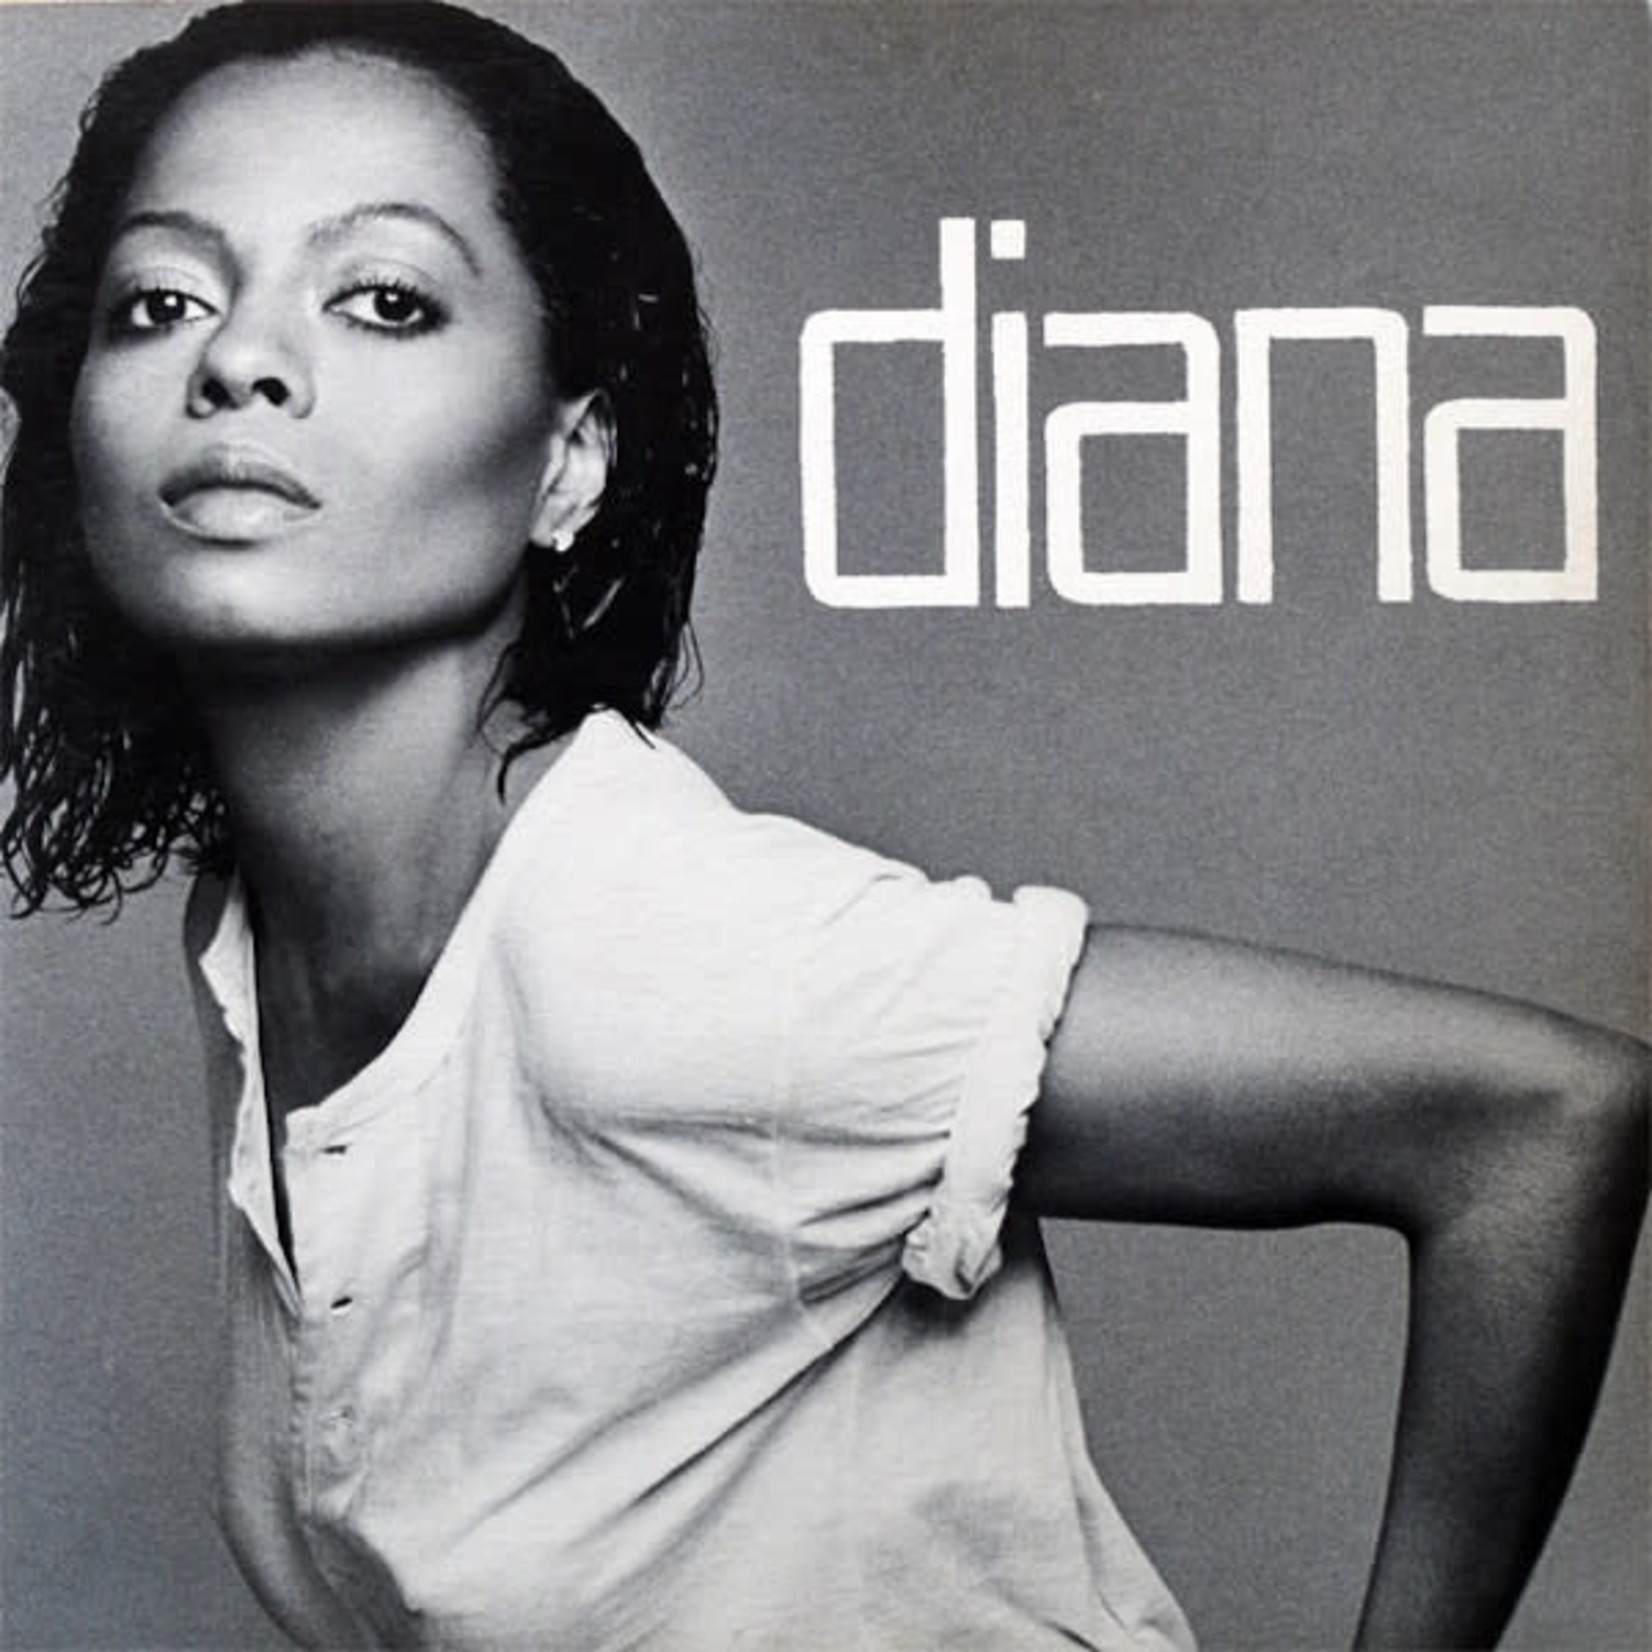 [Vintage] Diana Ross - Diana (1980, 'I'm Coming Out')